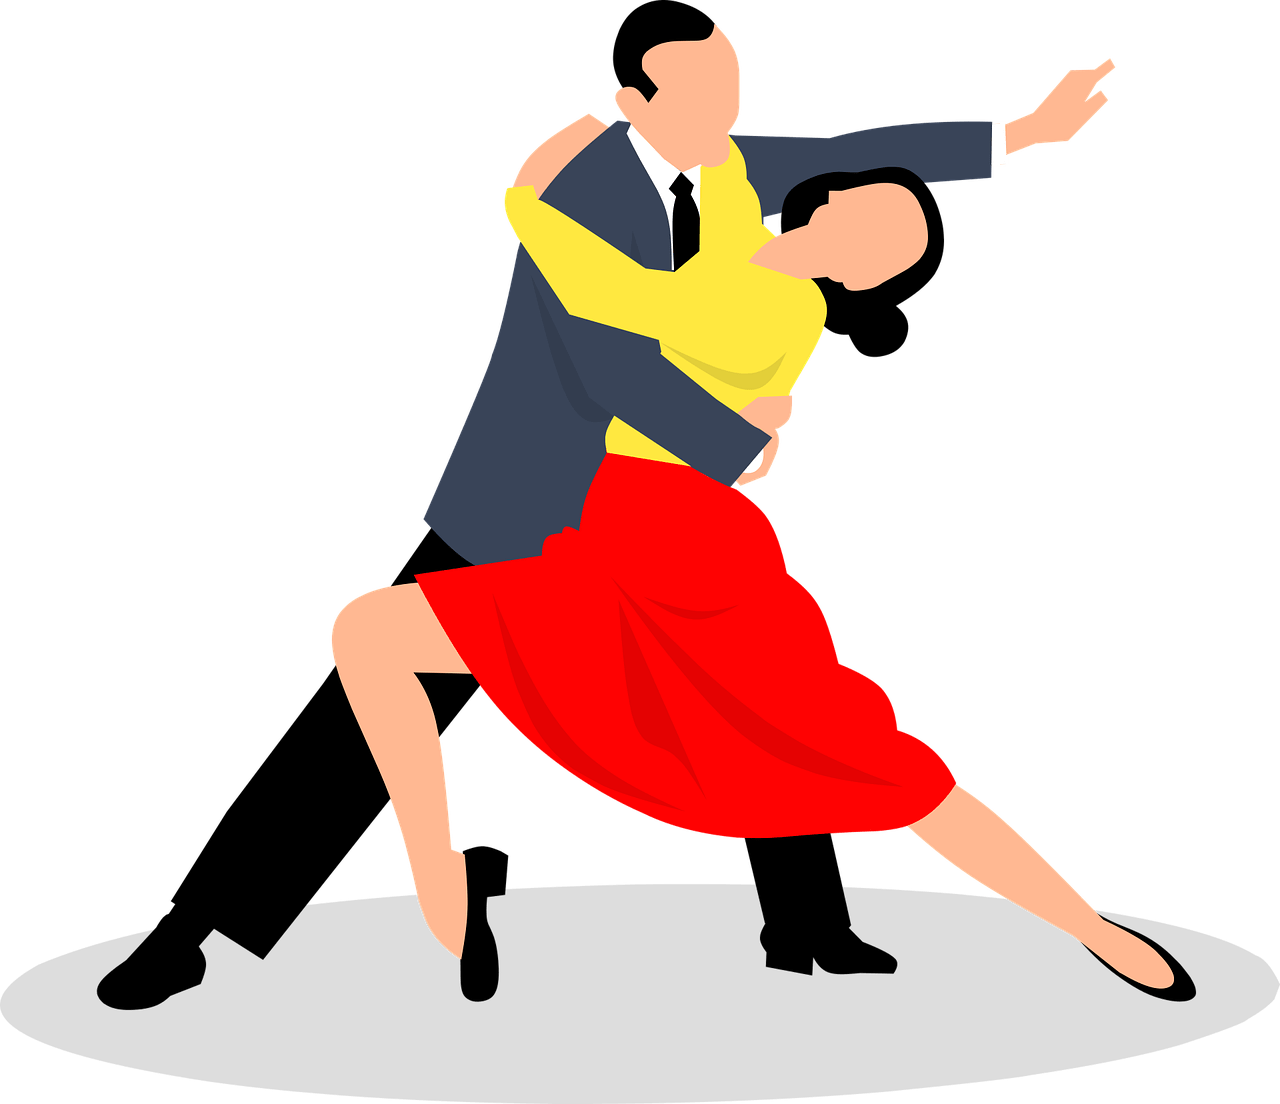 A drawing of two people dancing salsa